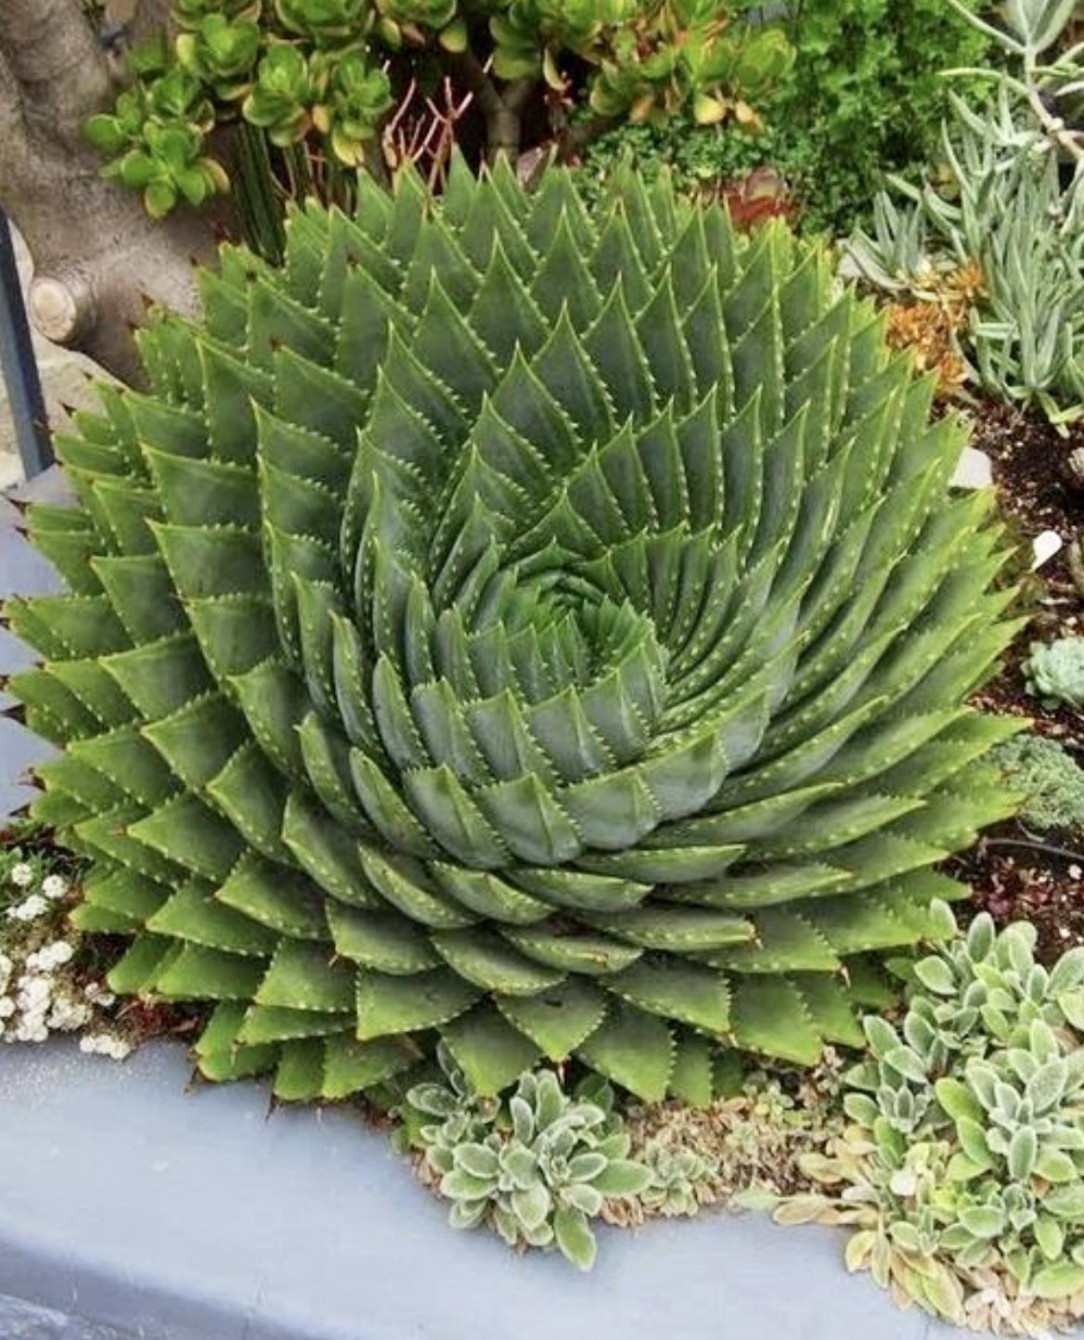 This spiral aloe plant